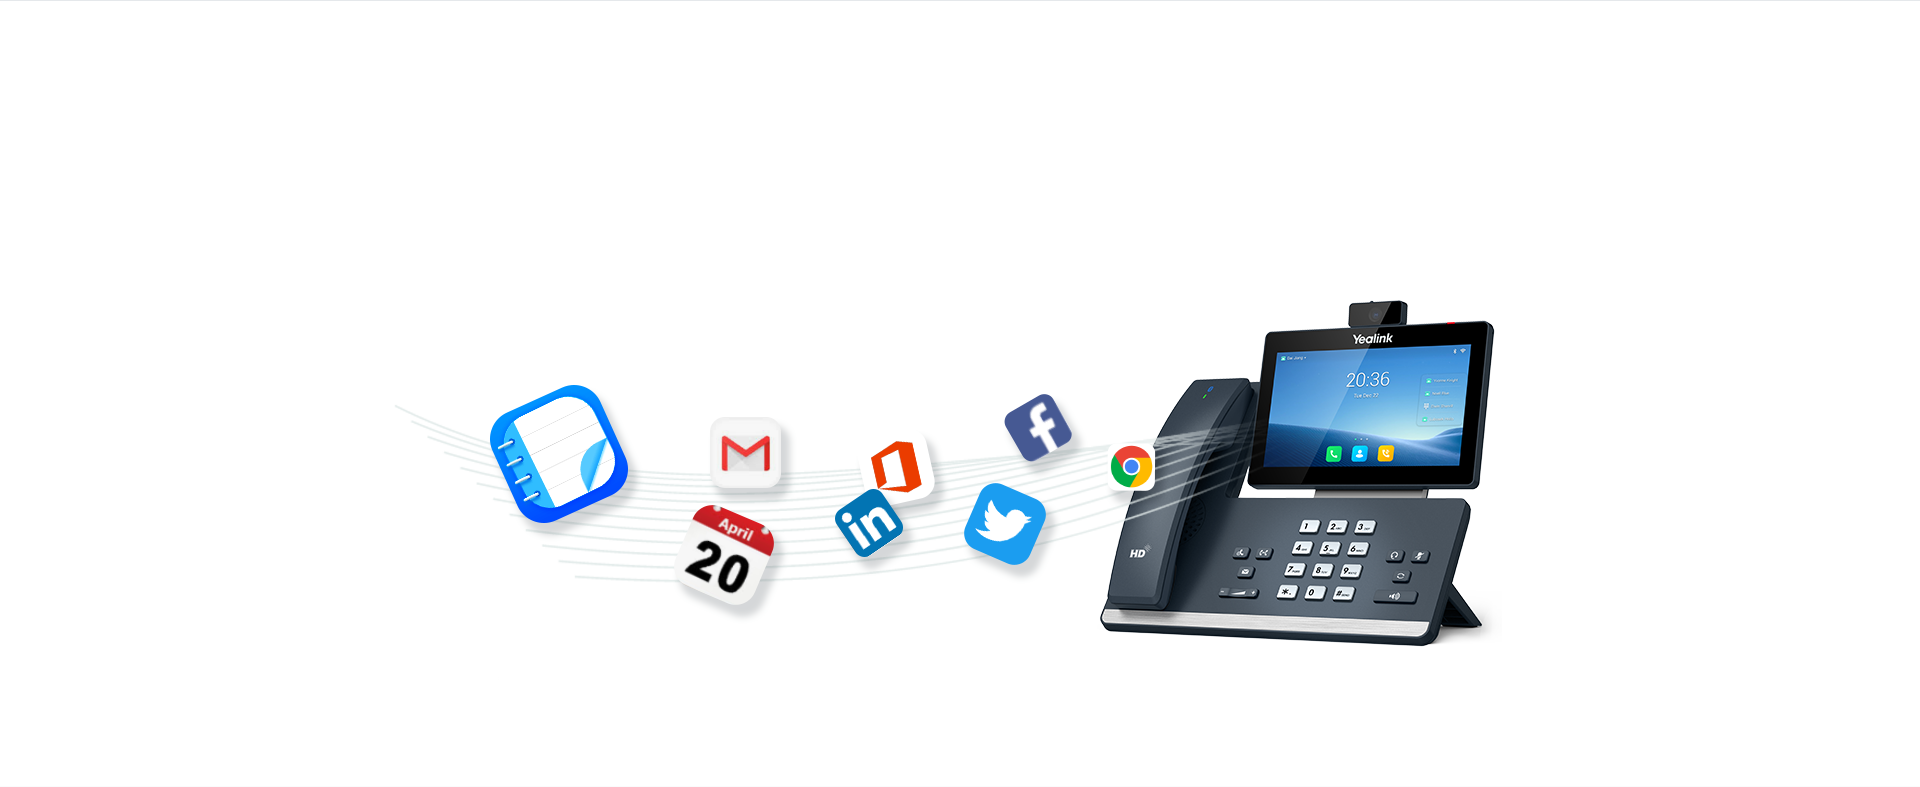 voip phone service for business,what is a sip phone,handset for cell phone